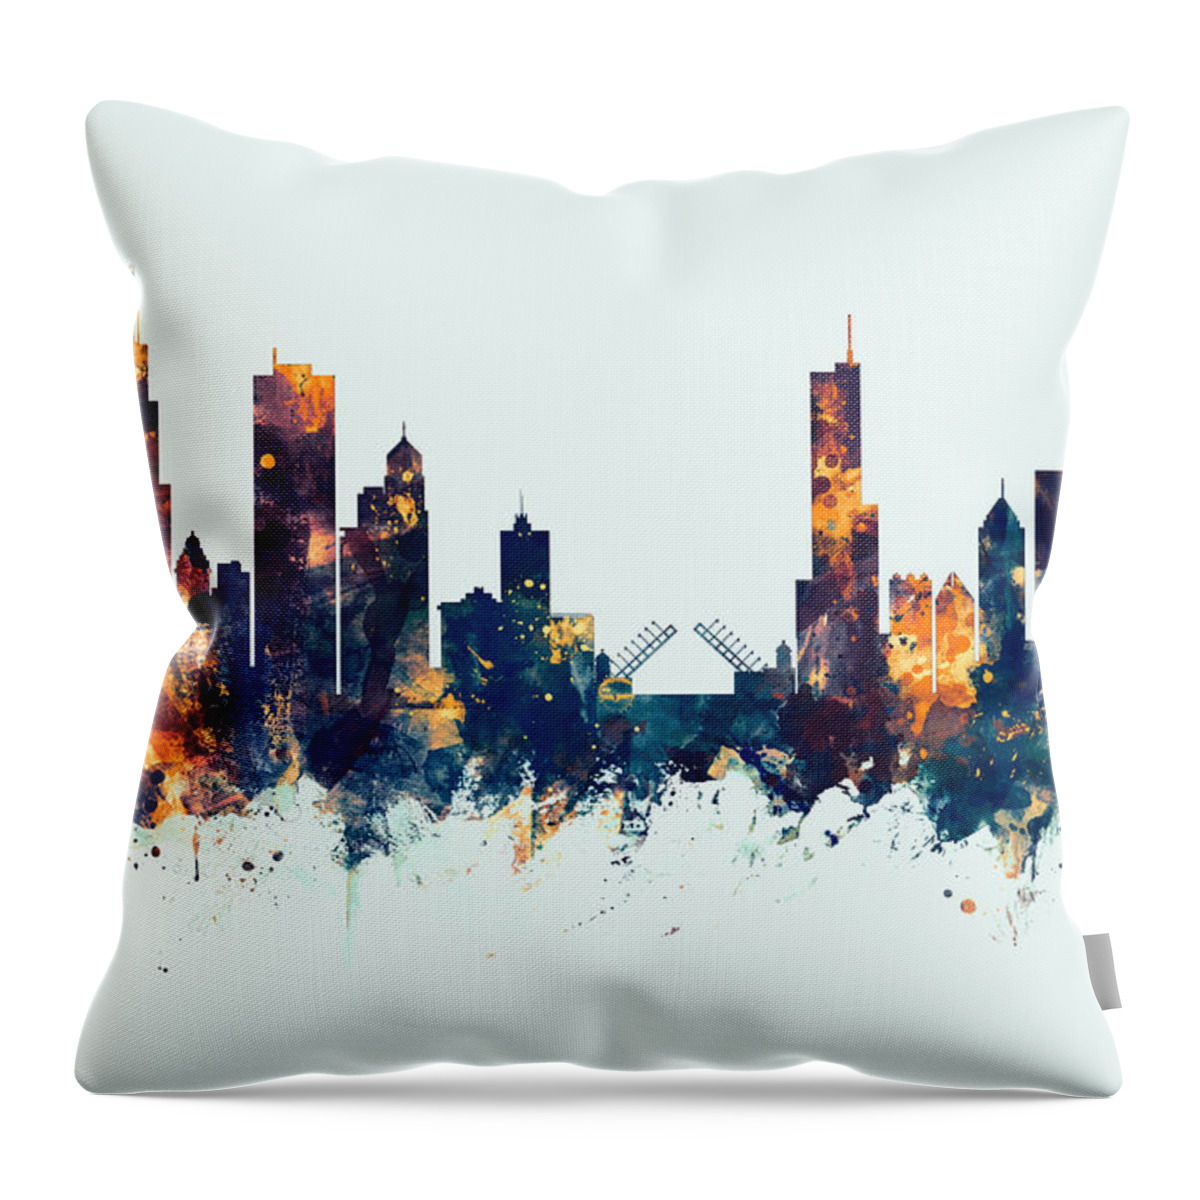 Chicago Throw Pillow featuring the digital art Chicago Illinois Skyline #23 by Michael Tompsett